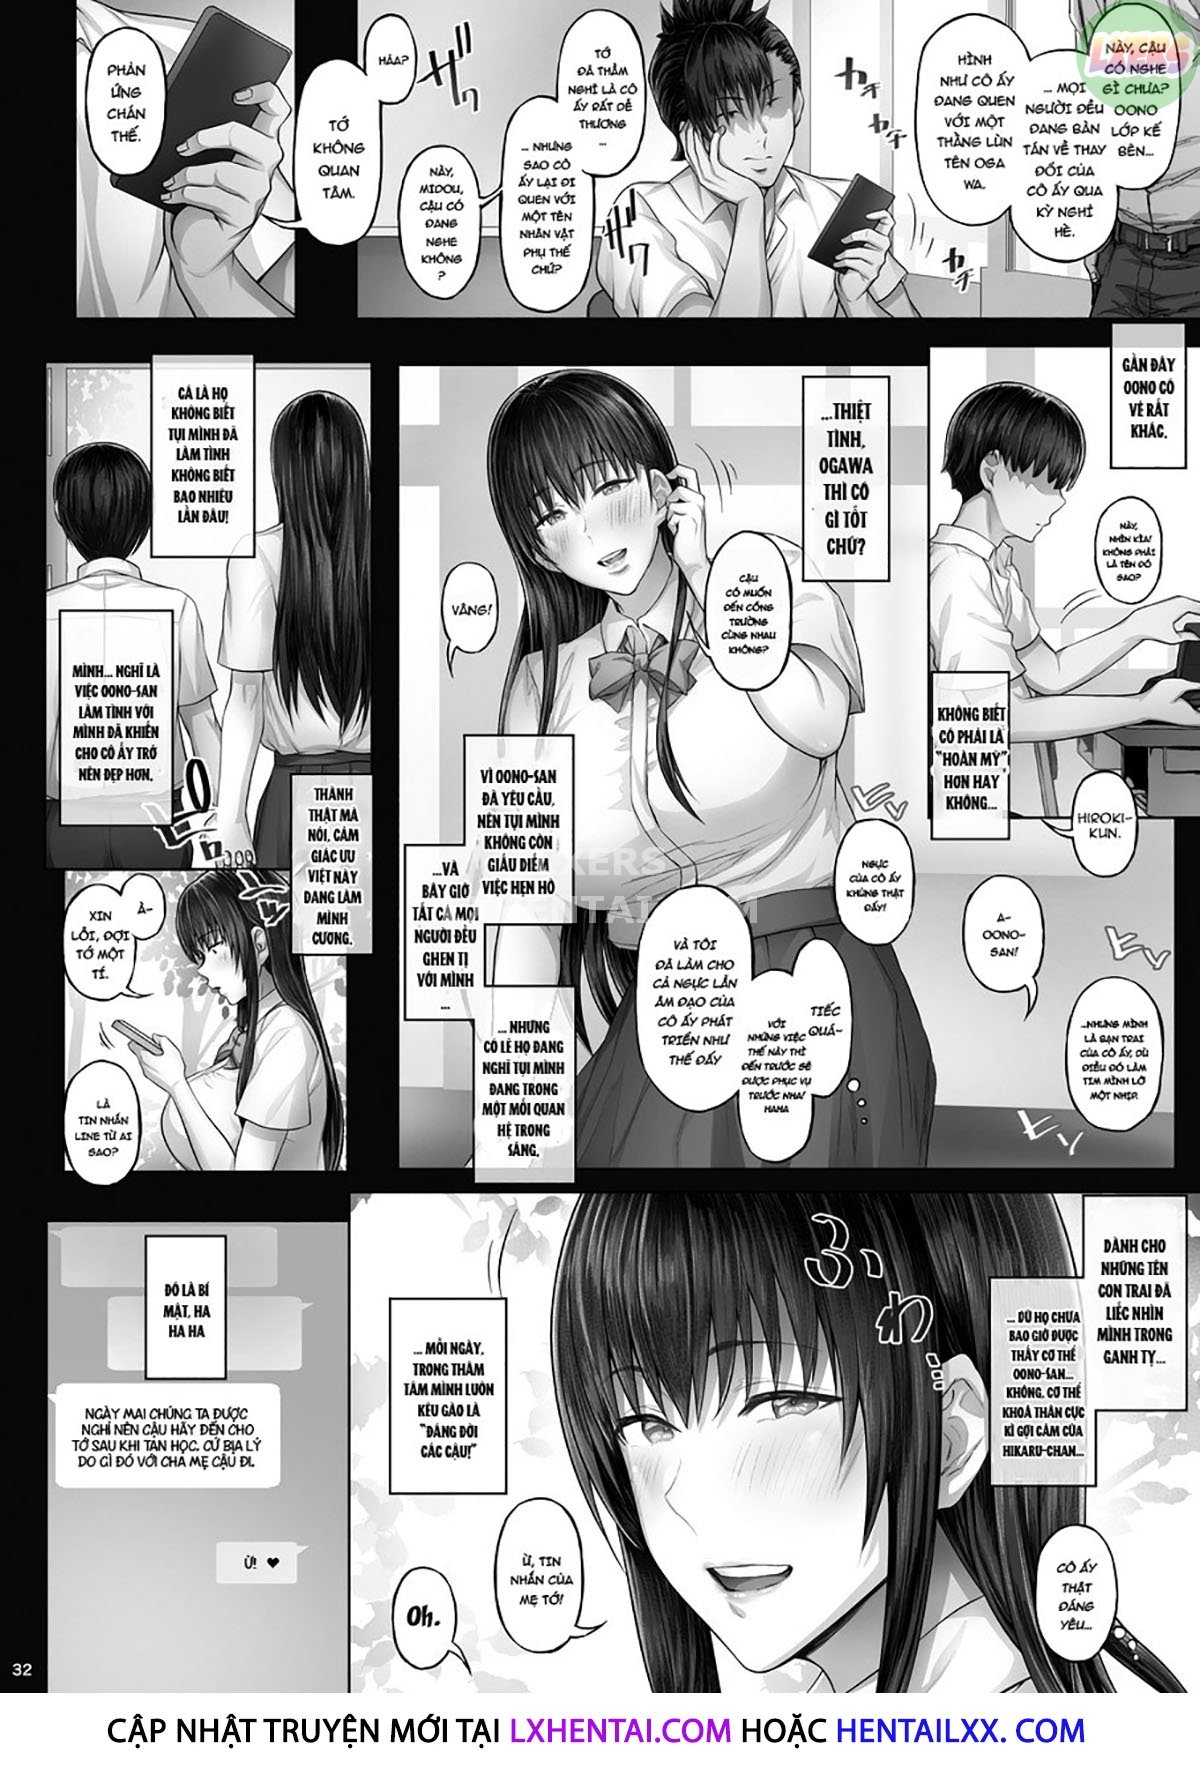 Xem ảnh What My Girlfriend Does That I Don't Know About - Chapter 2 END - 1646409780776_0 - Hentai24h.Tv